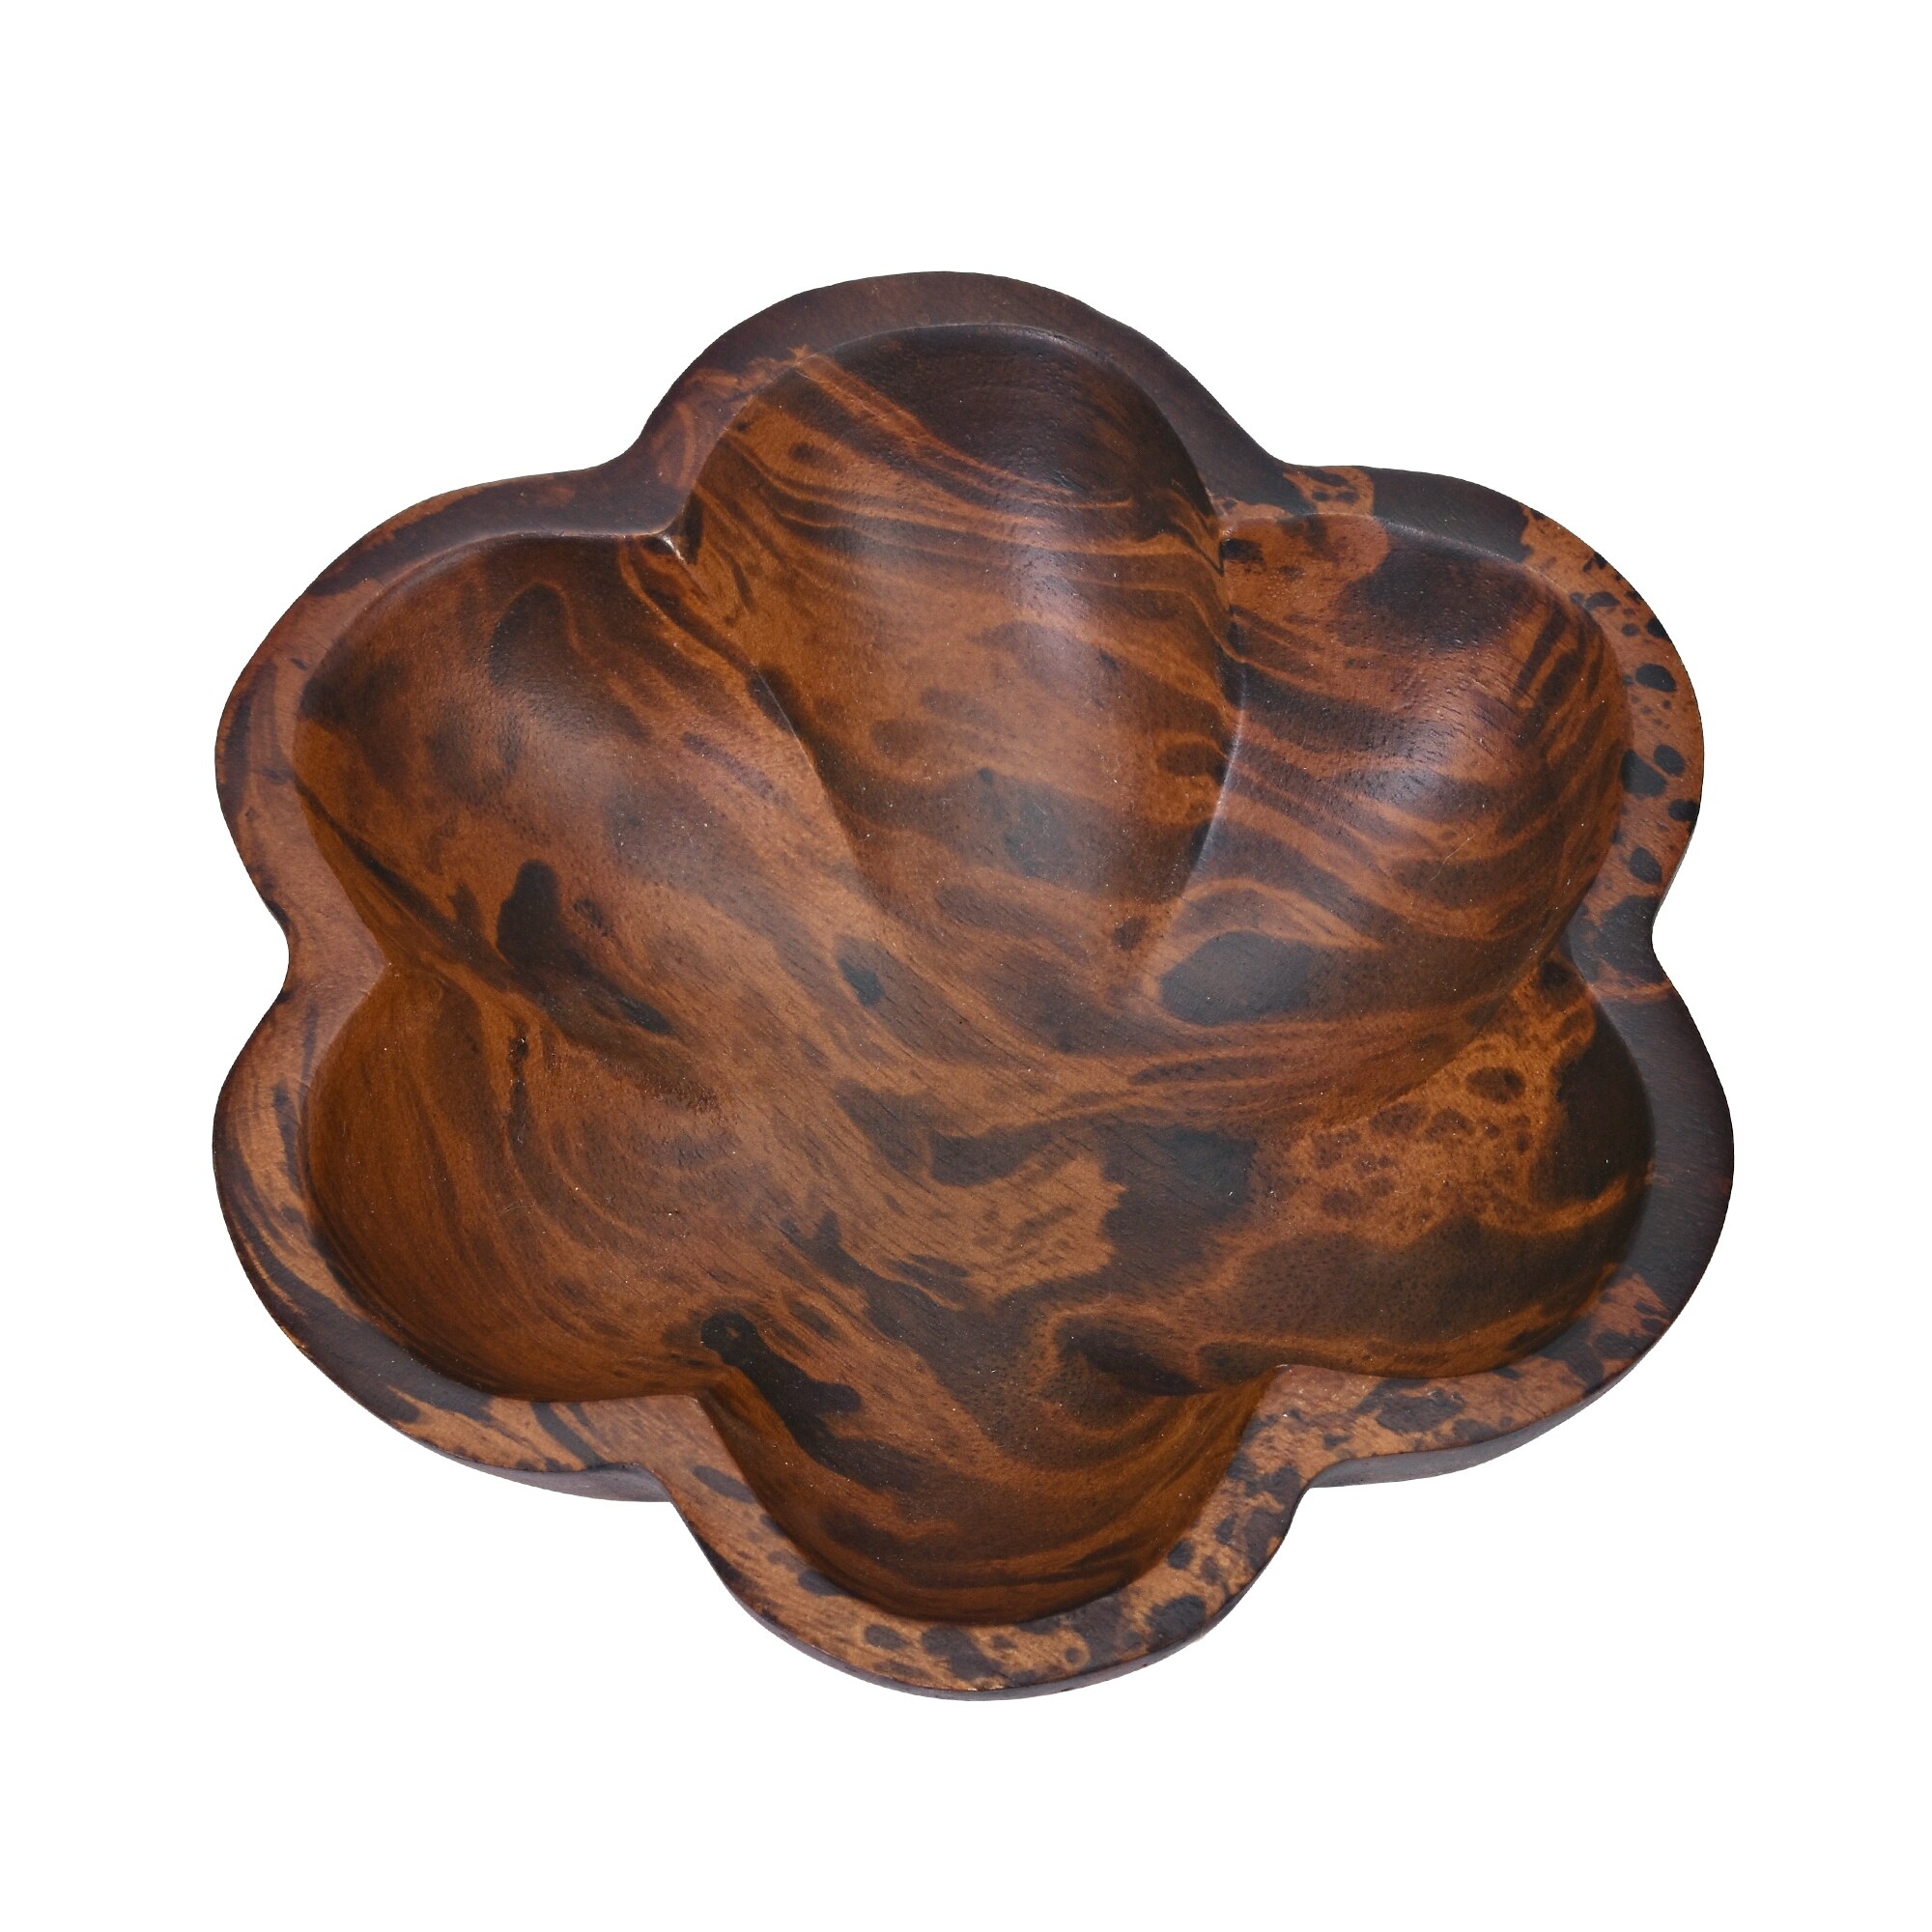 Villacera 83-DT5874 Handmade 8 Black Mango Round Bowl 8 Black Eco-Friendly and Sustainable Wood Serving Dish or Home Decor Accent